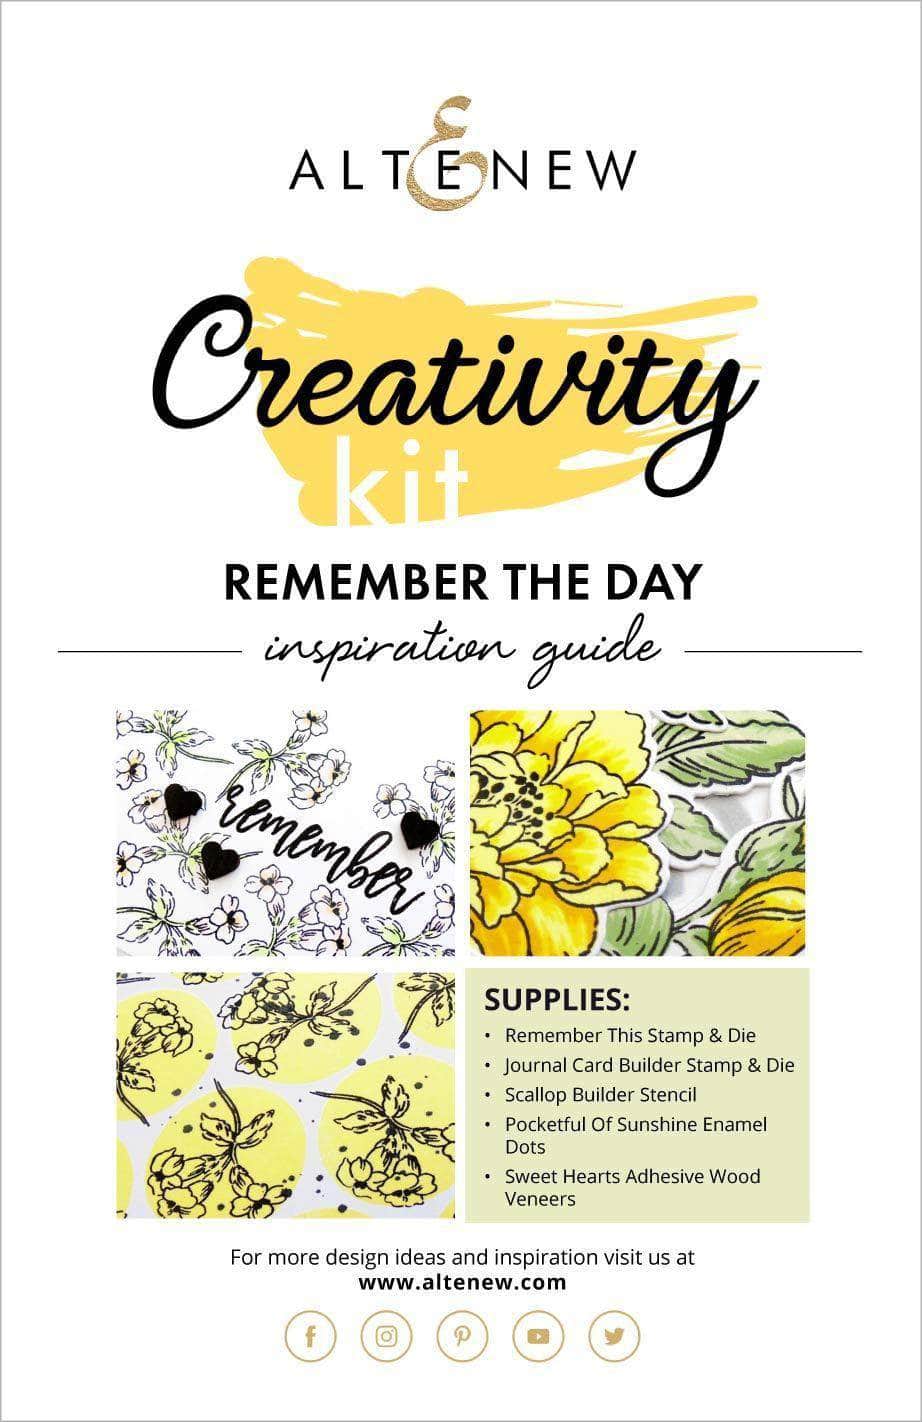 55Printing.com Printed Media Remember The Day Creativity Kit Inspiration Guide